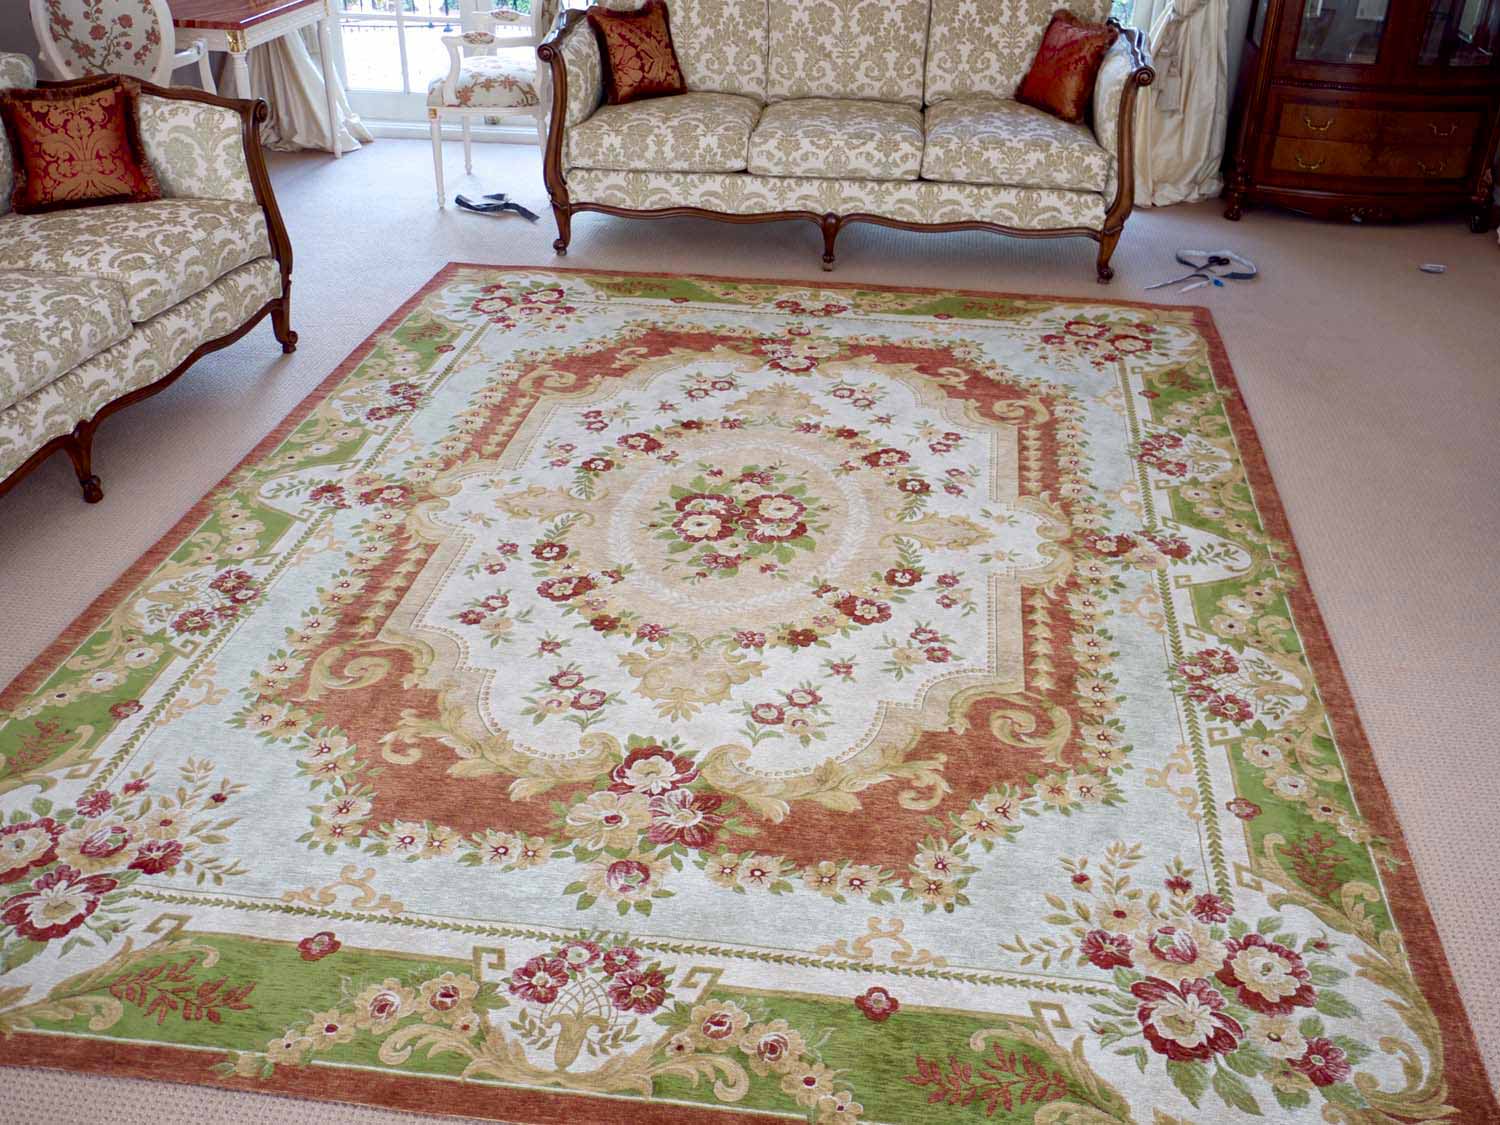 16 French style rugs and carpets